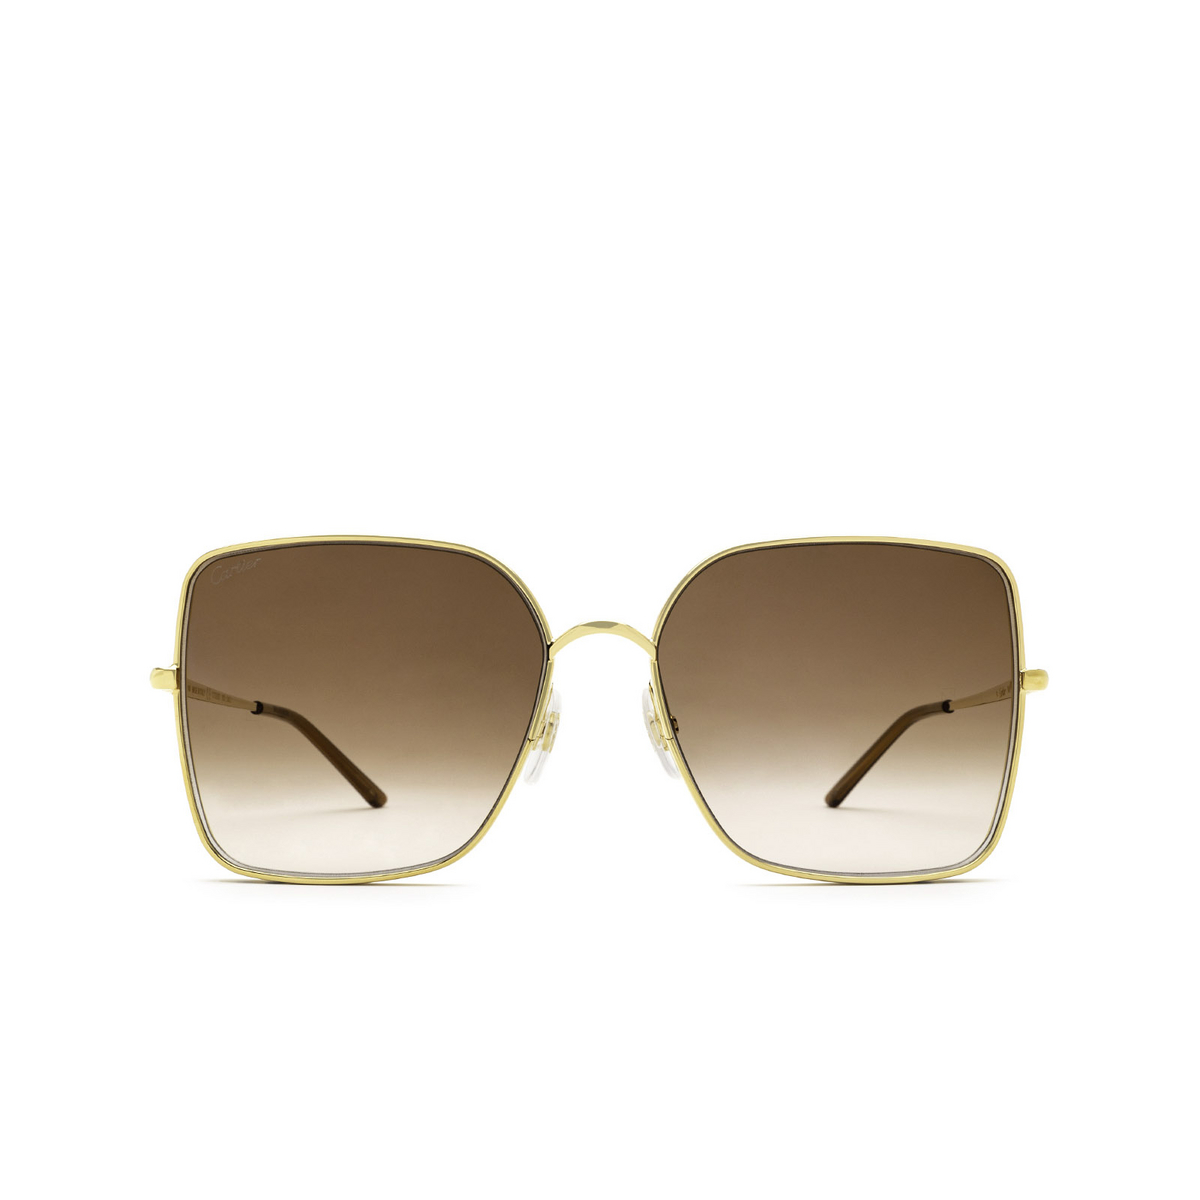 Cartier® Square Sunglasses: CT0299S color Gold 002 - front view.